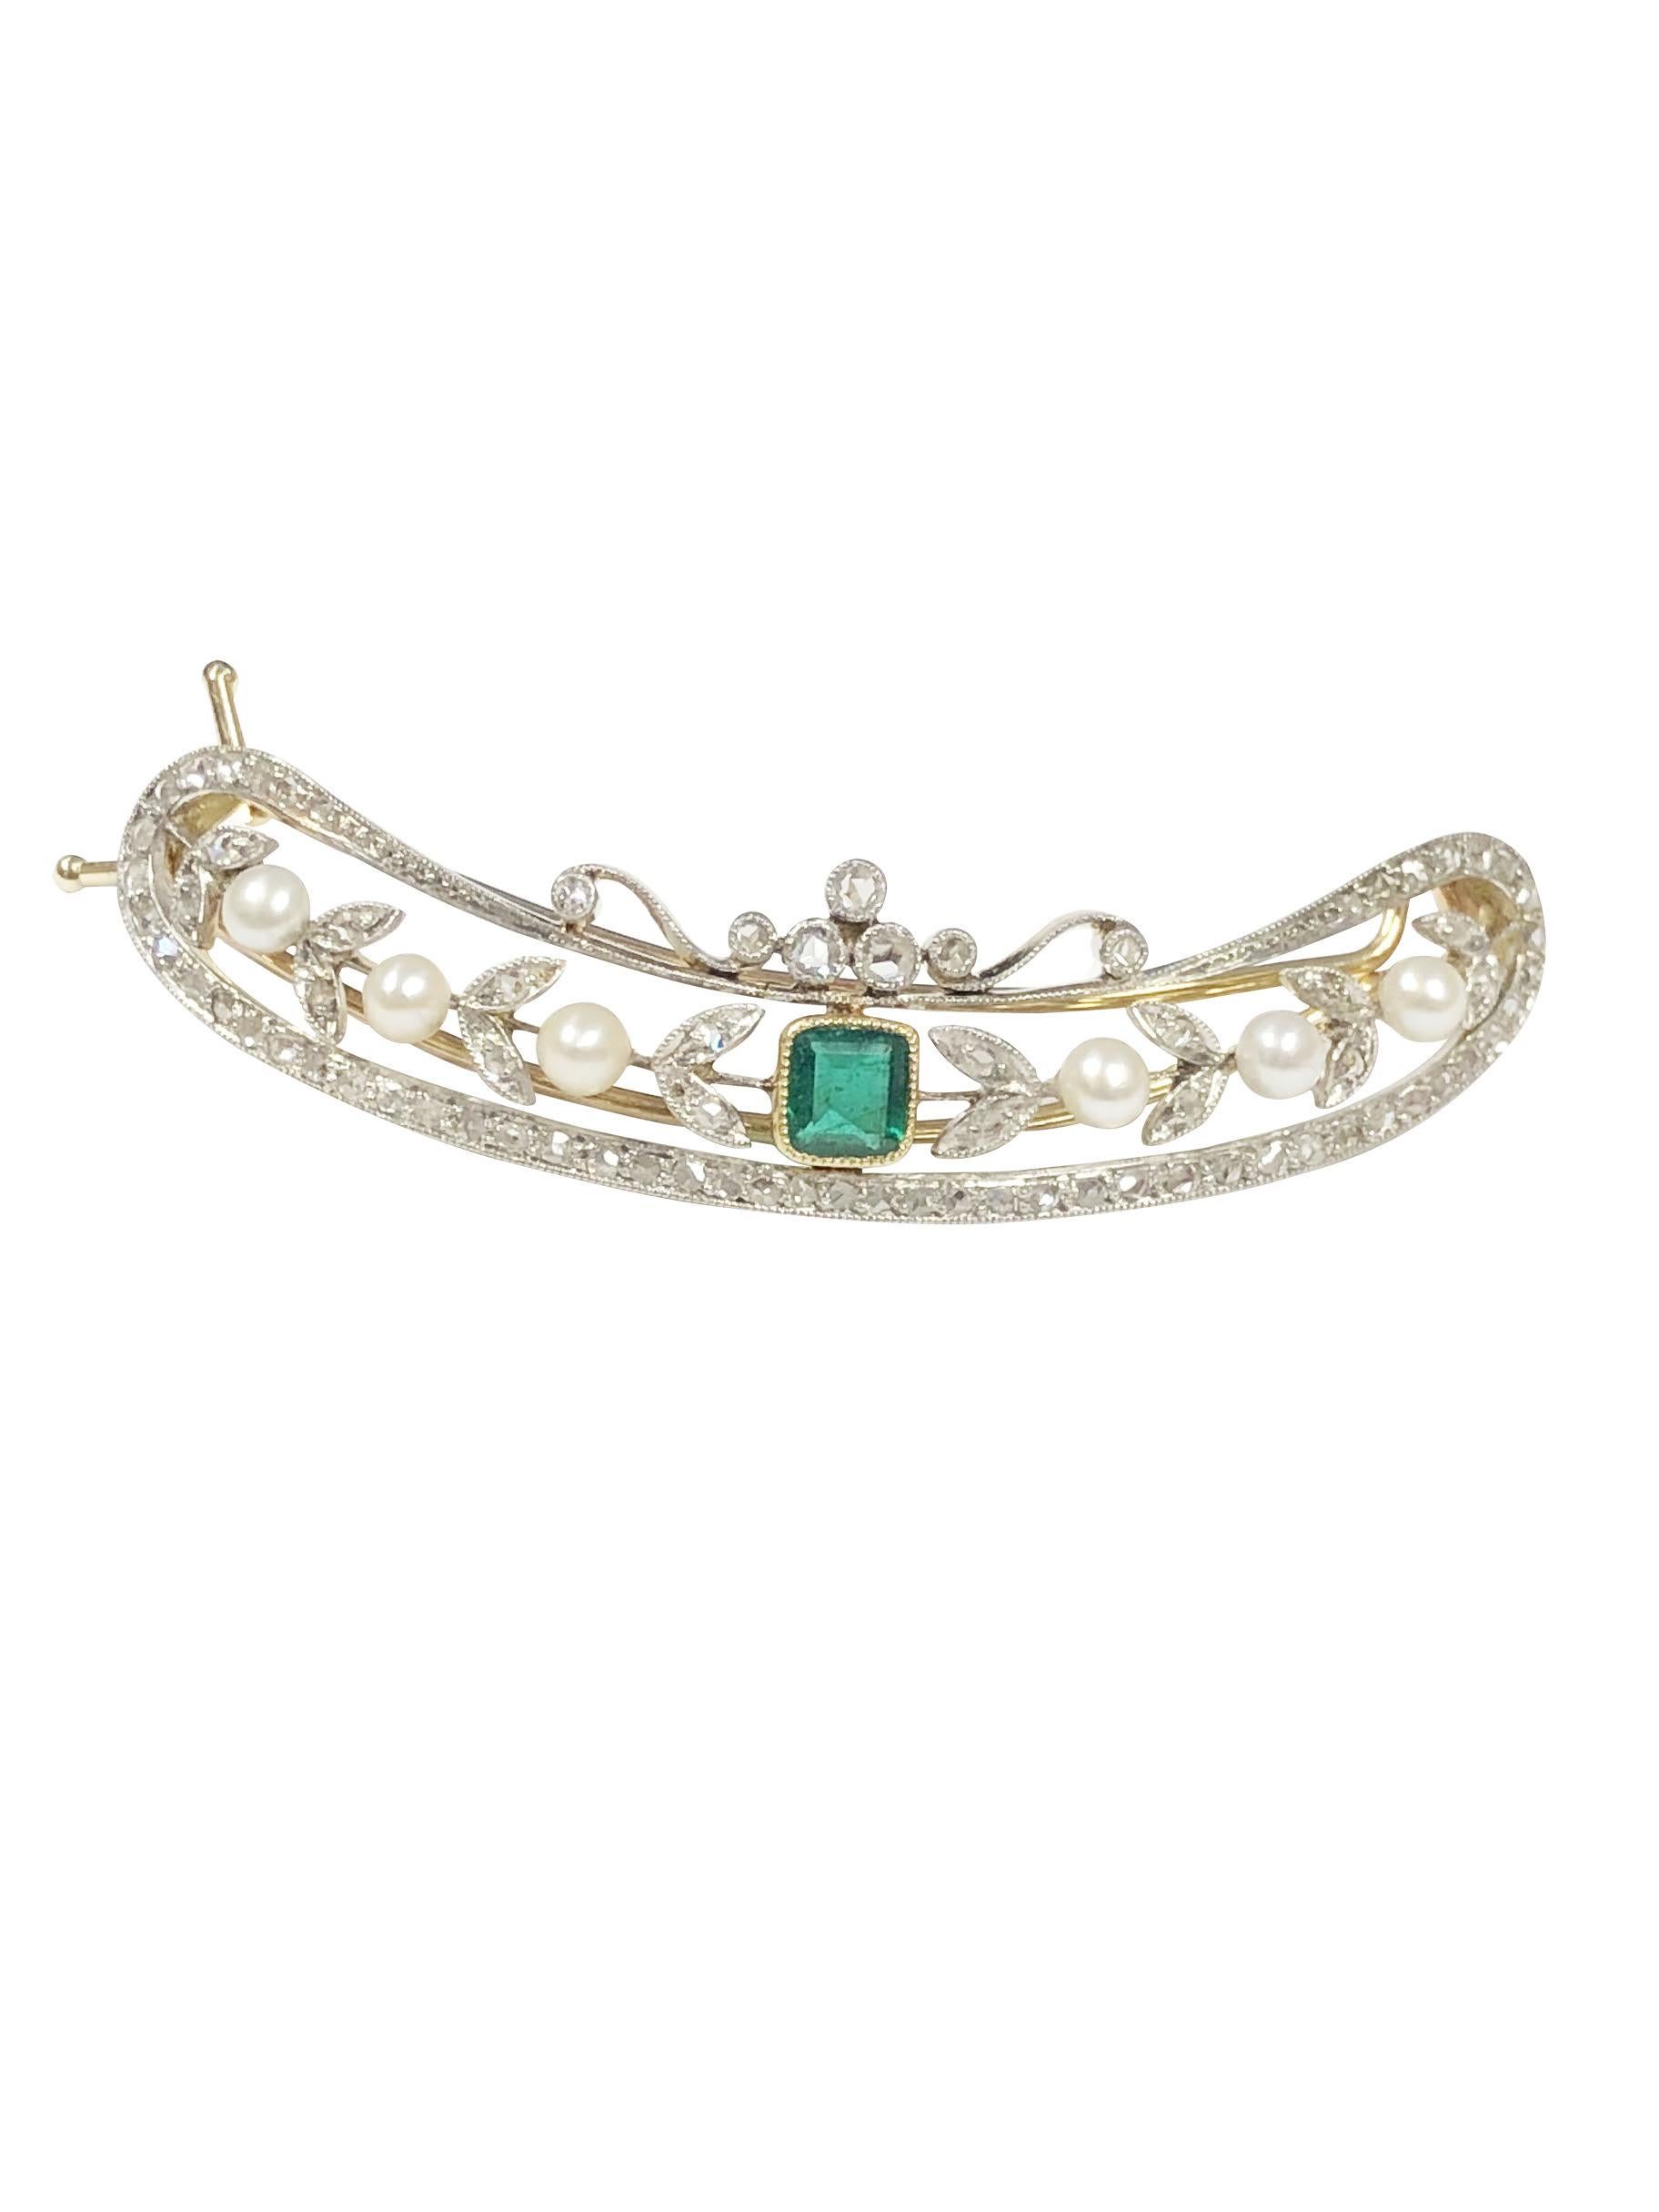 Circa 1915 Platinum top and Gold back Hair Barrett, measuring 2 1/4 inches in length and 1/2 inch wide. Centrally set with a Square step cut Emerald of very fine Color, Natural Pearls, and further surrounded by Rose cut Diamonds.  Absolute Excellent